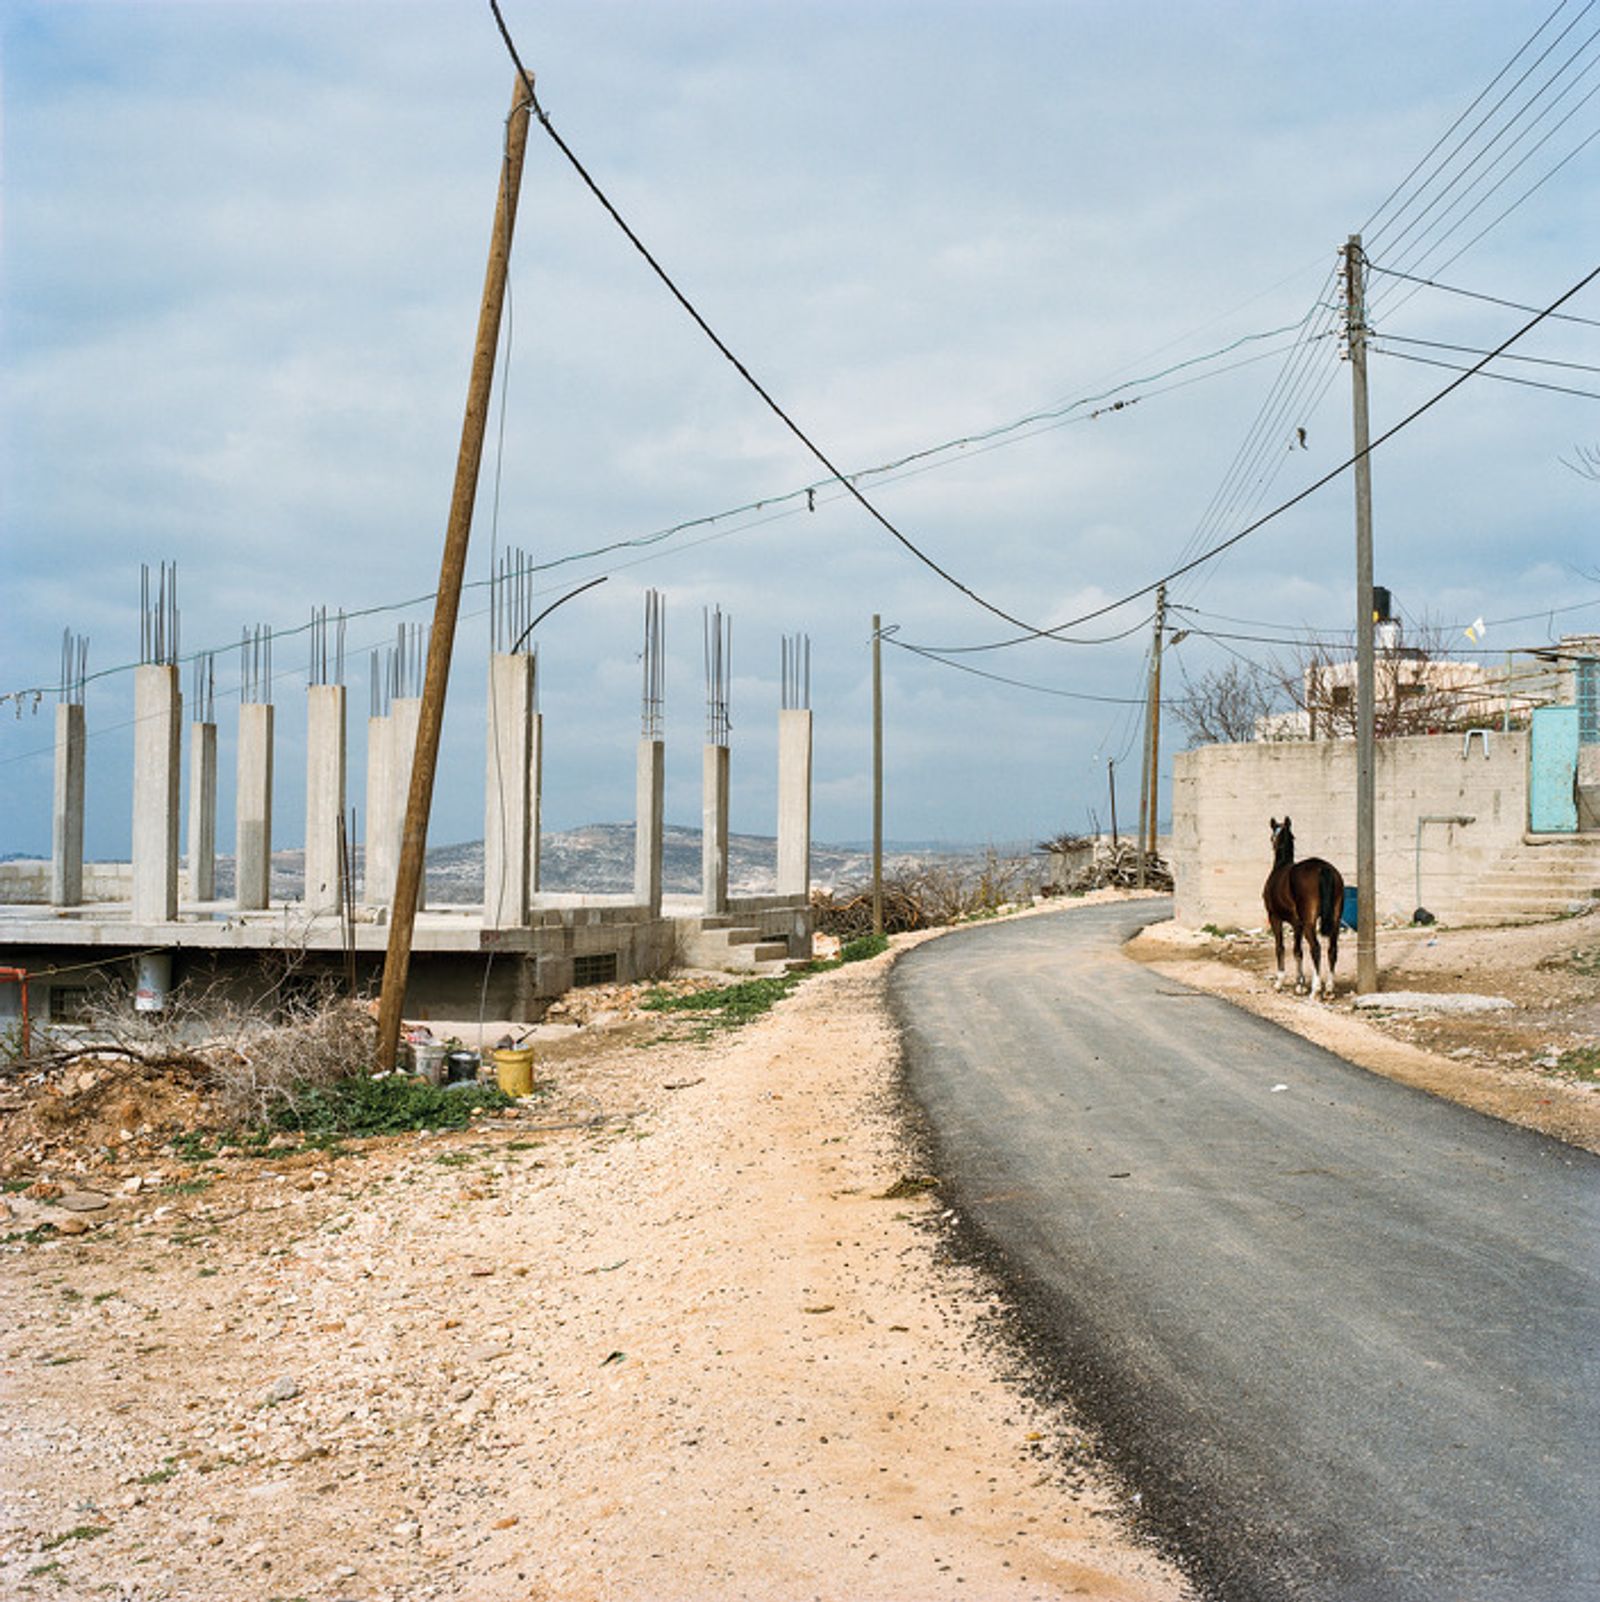 © Federico Busonero - A horse tied to a utility pole stands by the road to Iskaka, Palestine.